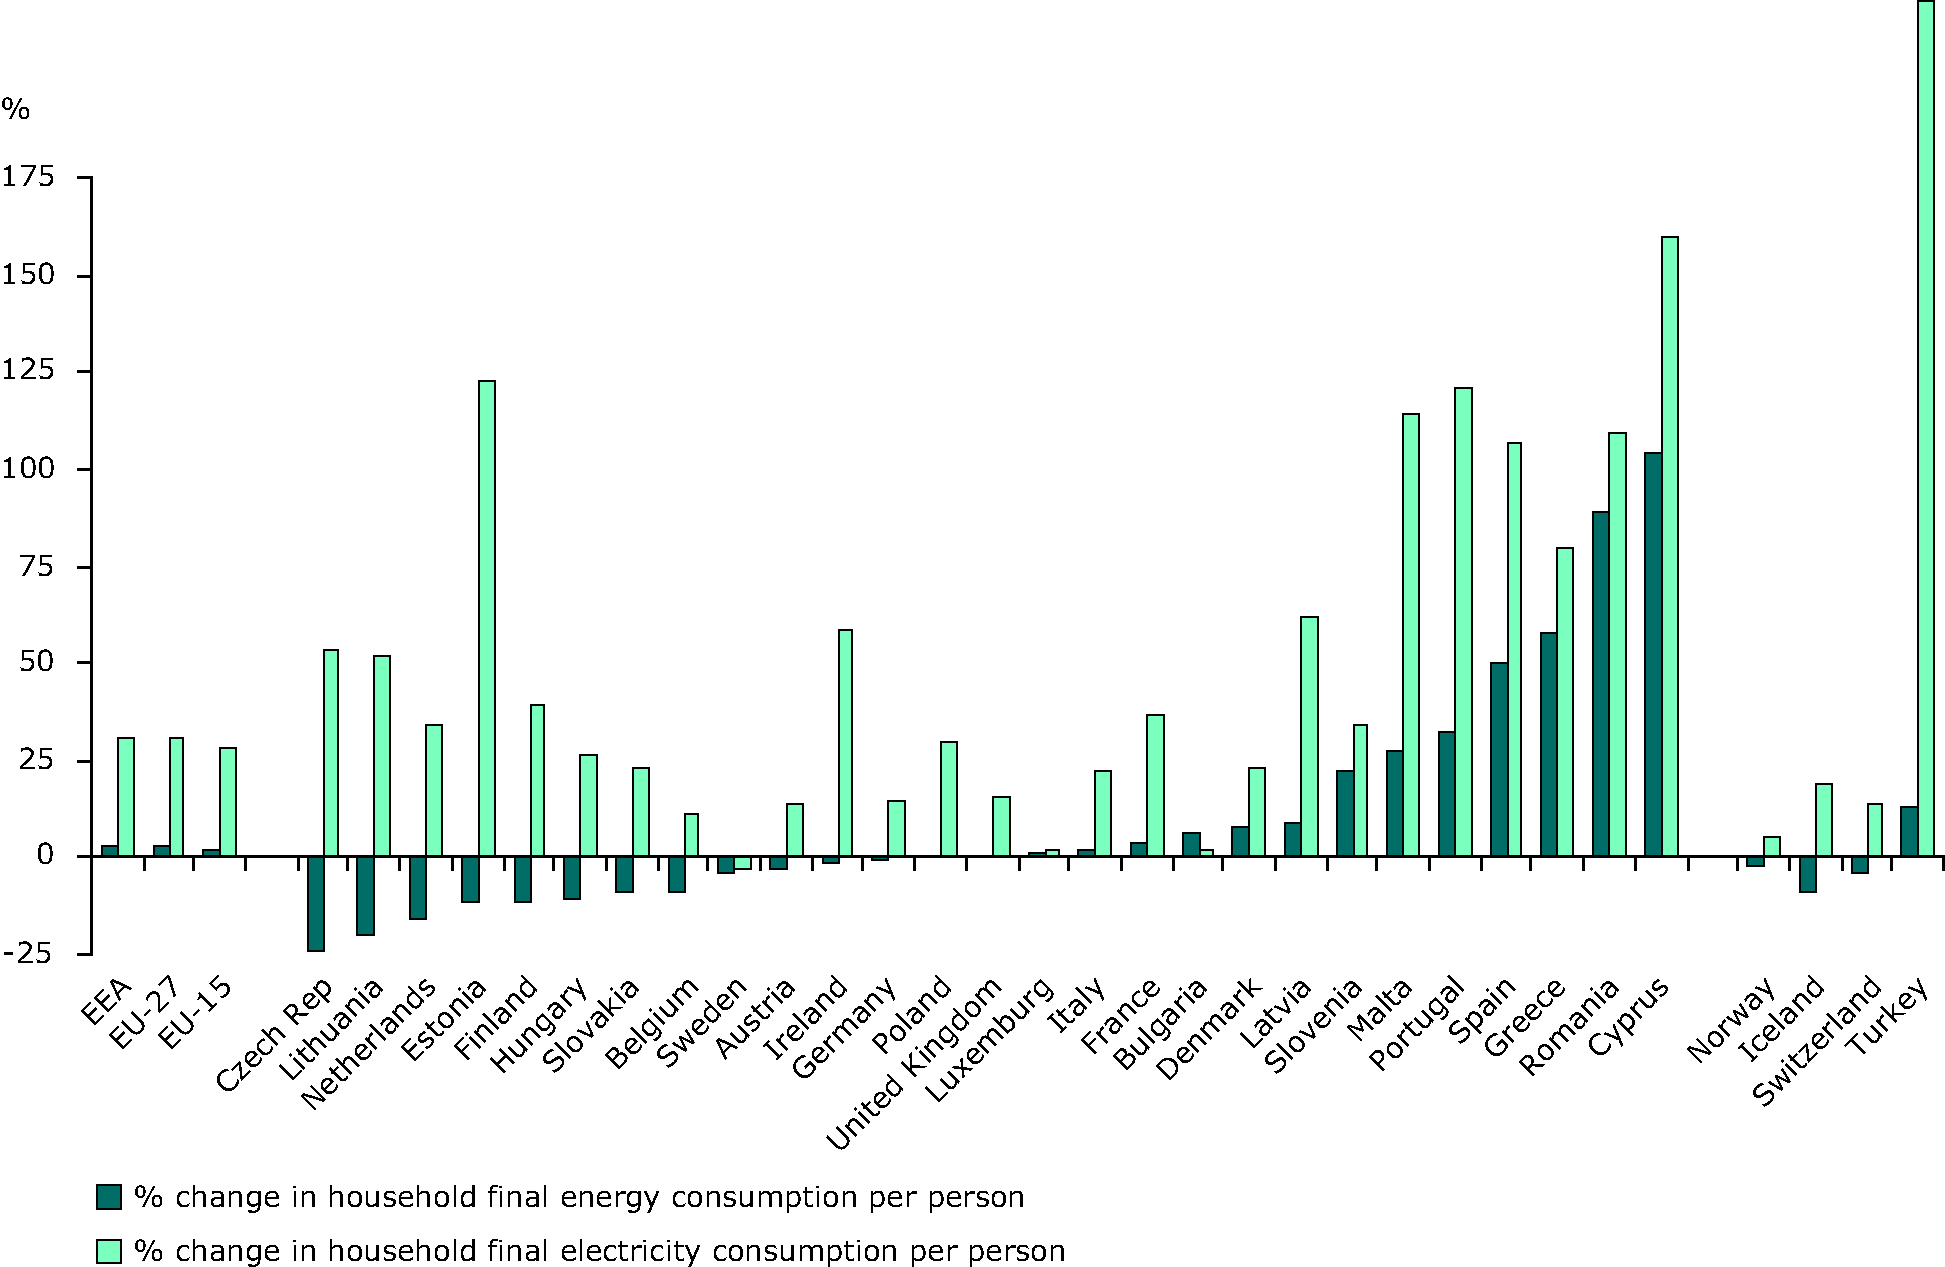 % change in household final energy consumption per person, 1990-2007